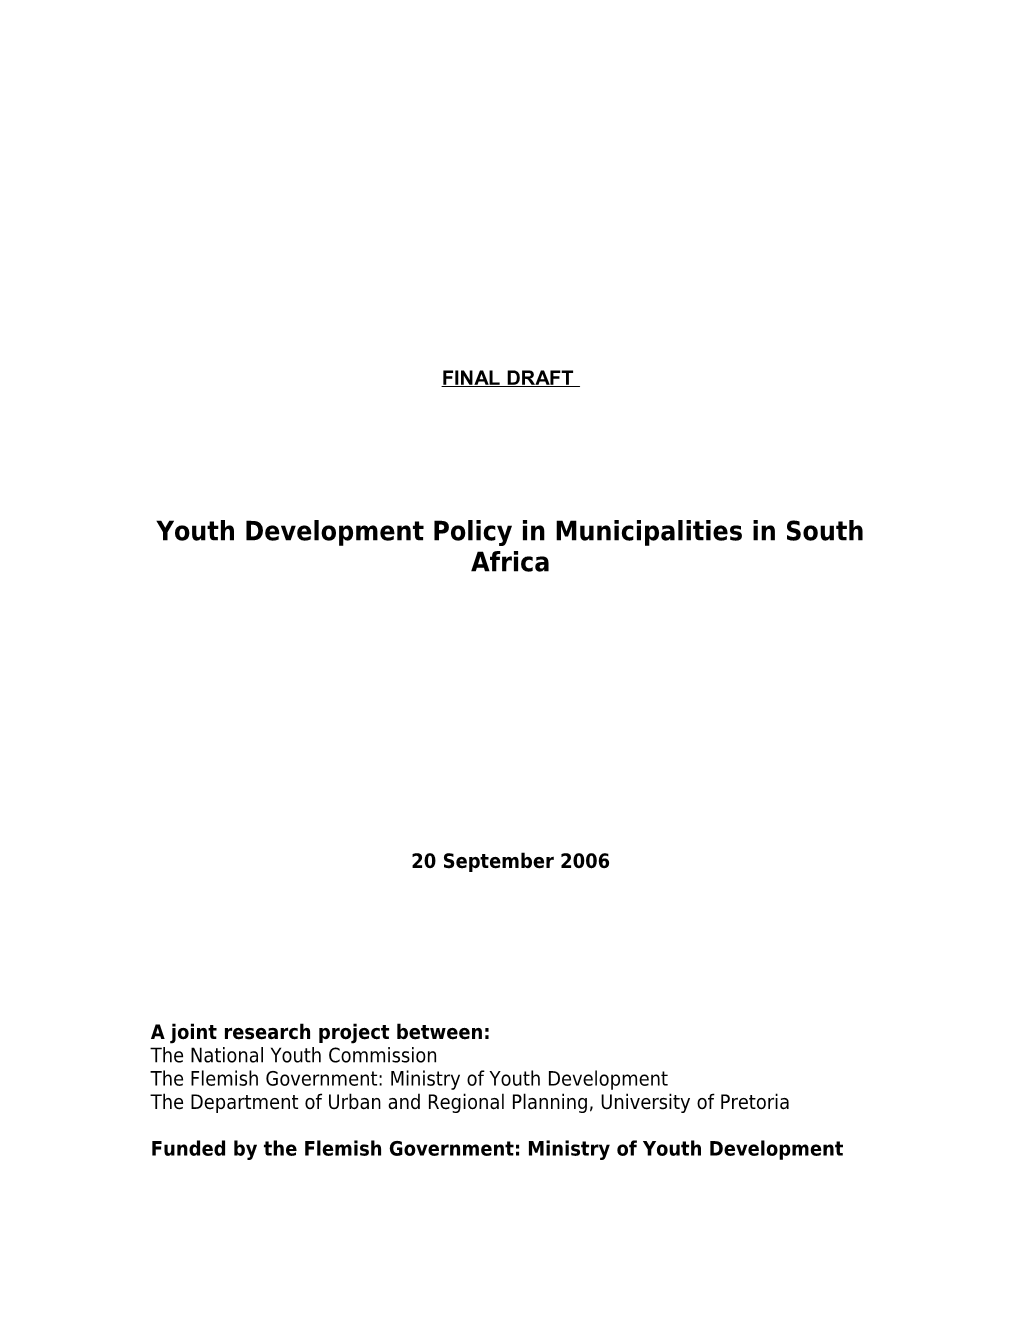 Research Into the Institutionalisation of Youth Development in South African Municipalities